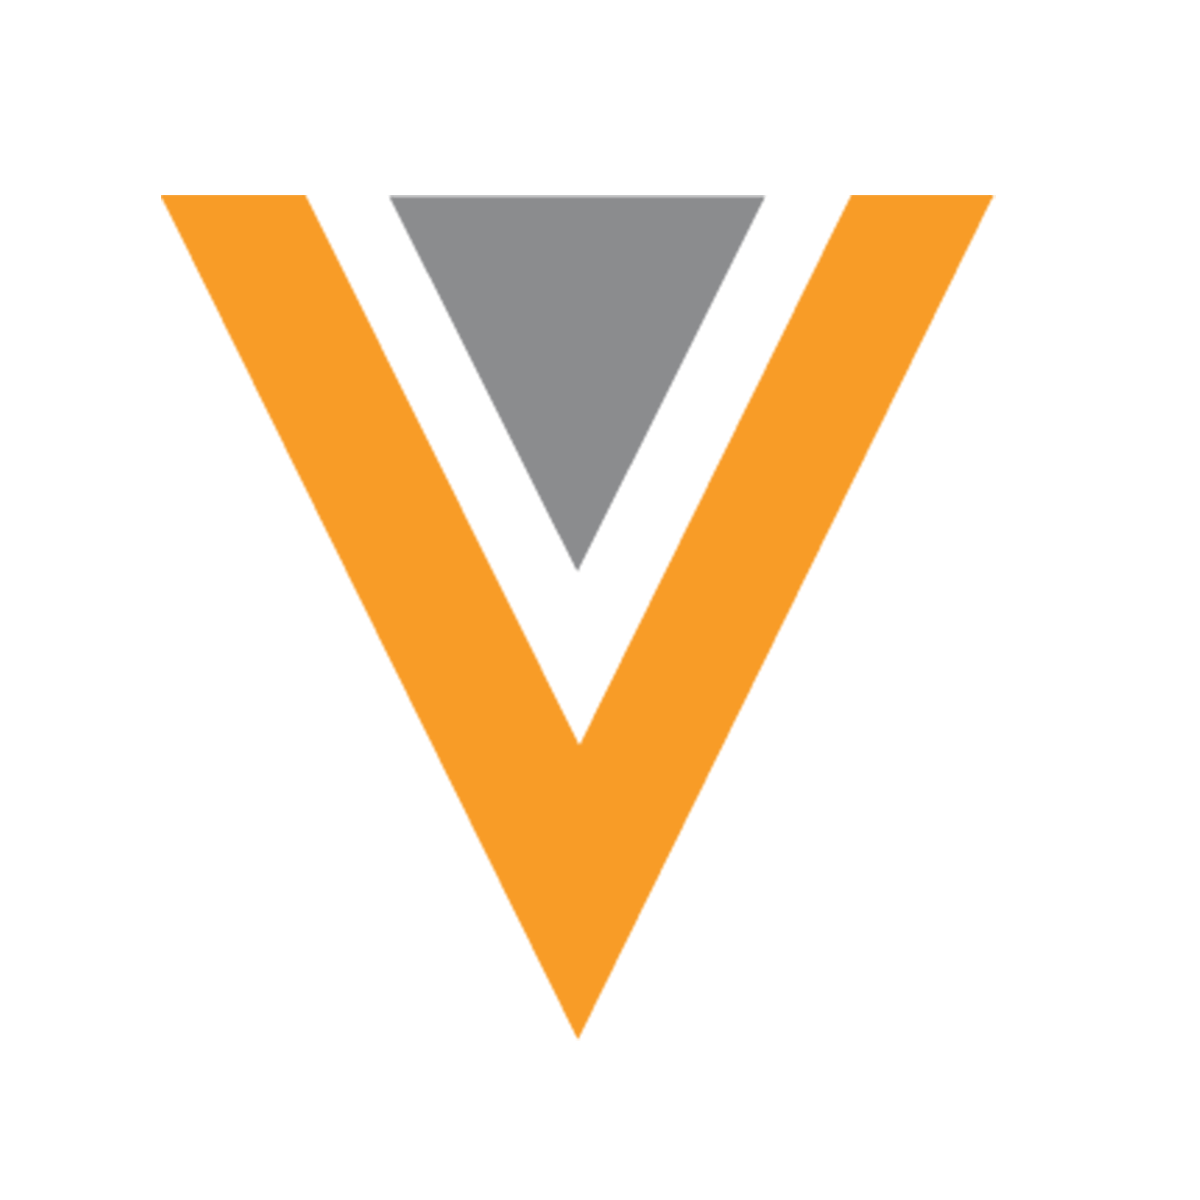 Google Apps Product Suite Logo - Veeva Systems